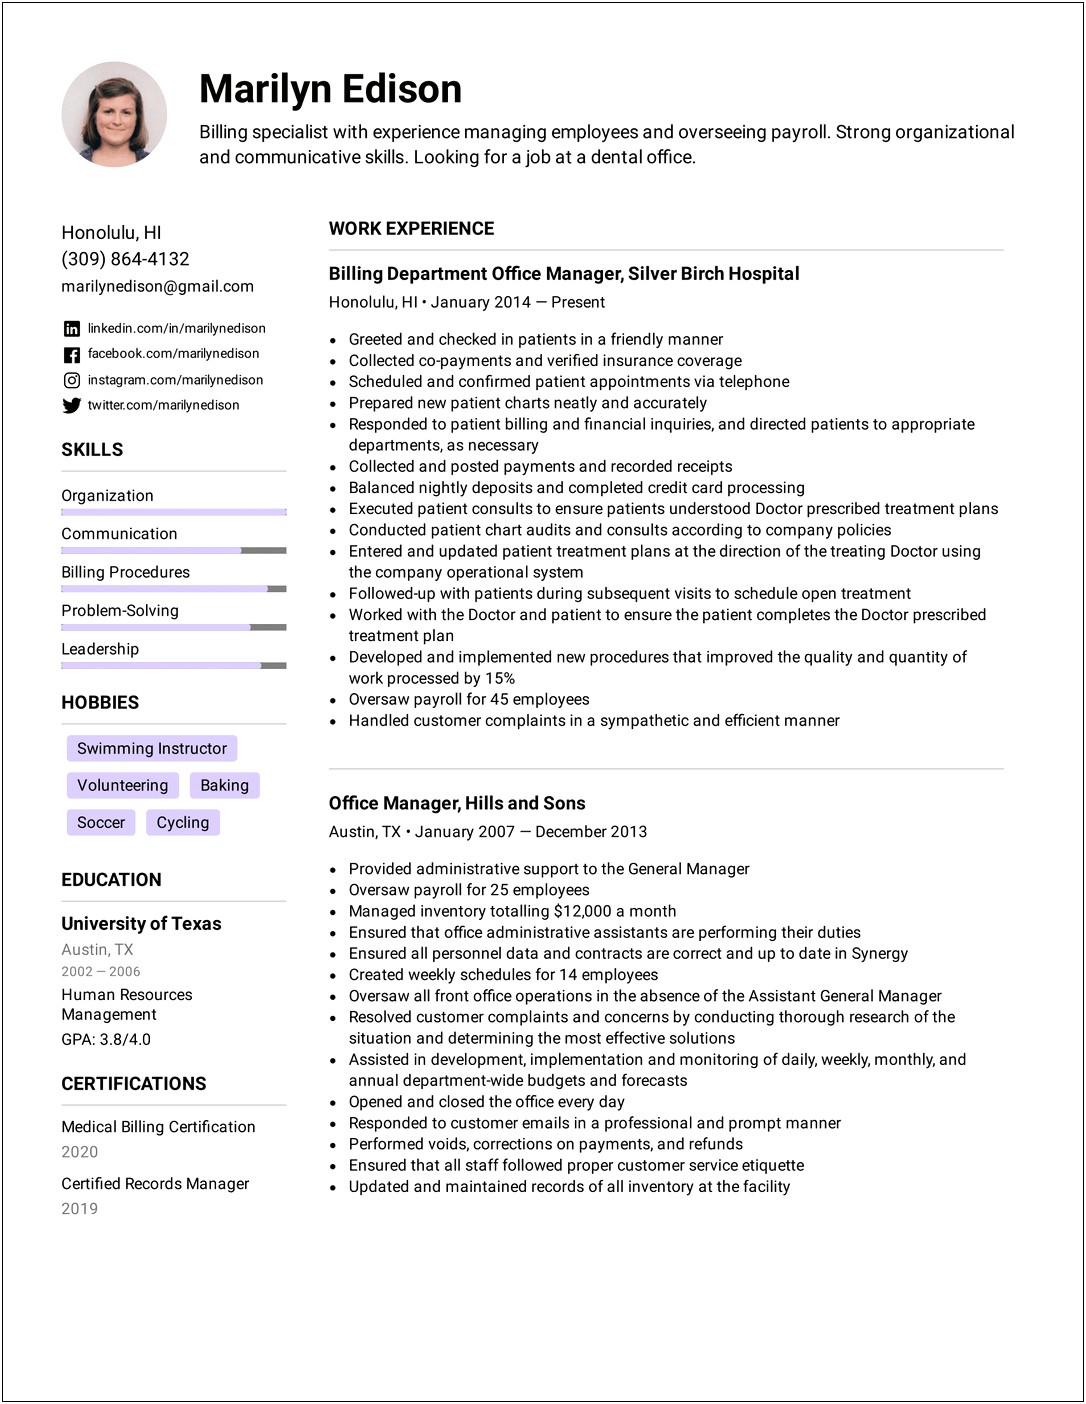 Chronological Order Of Experience On Resume